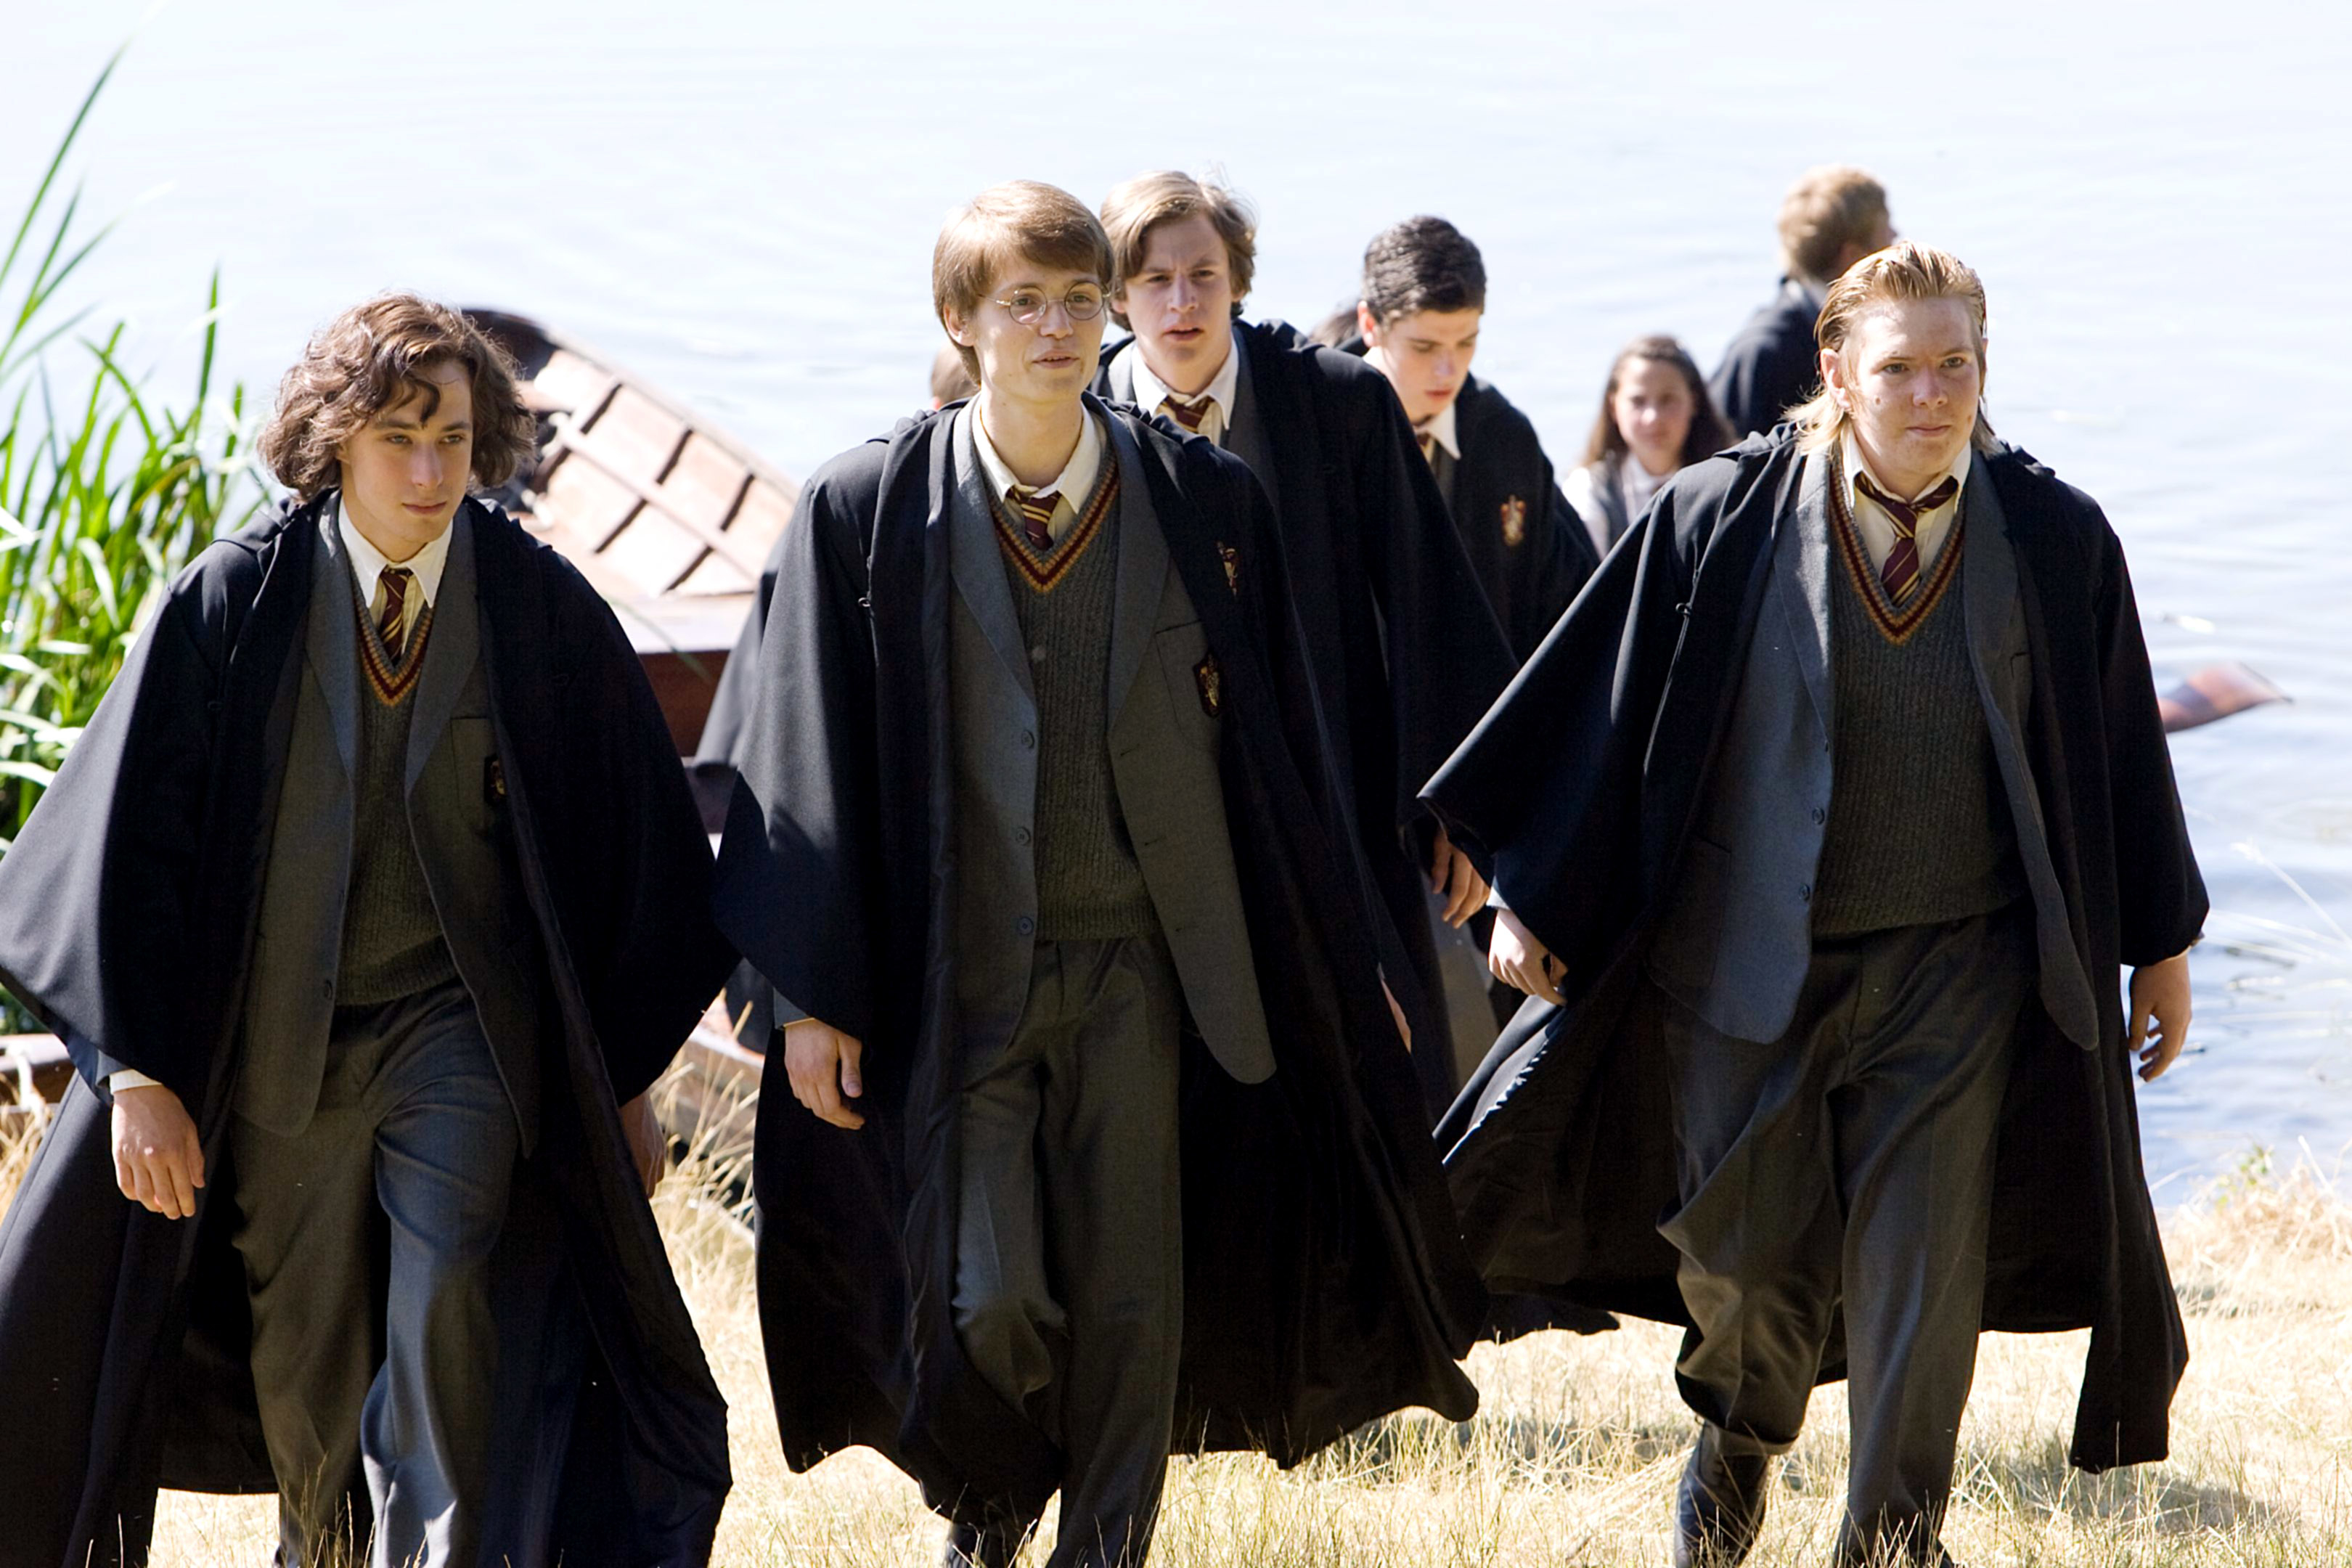 Harry Potter characters walking by a lake in Hogwarts uniform